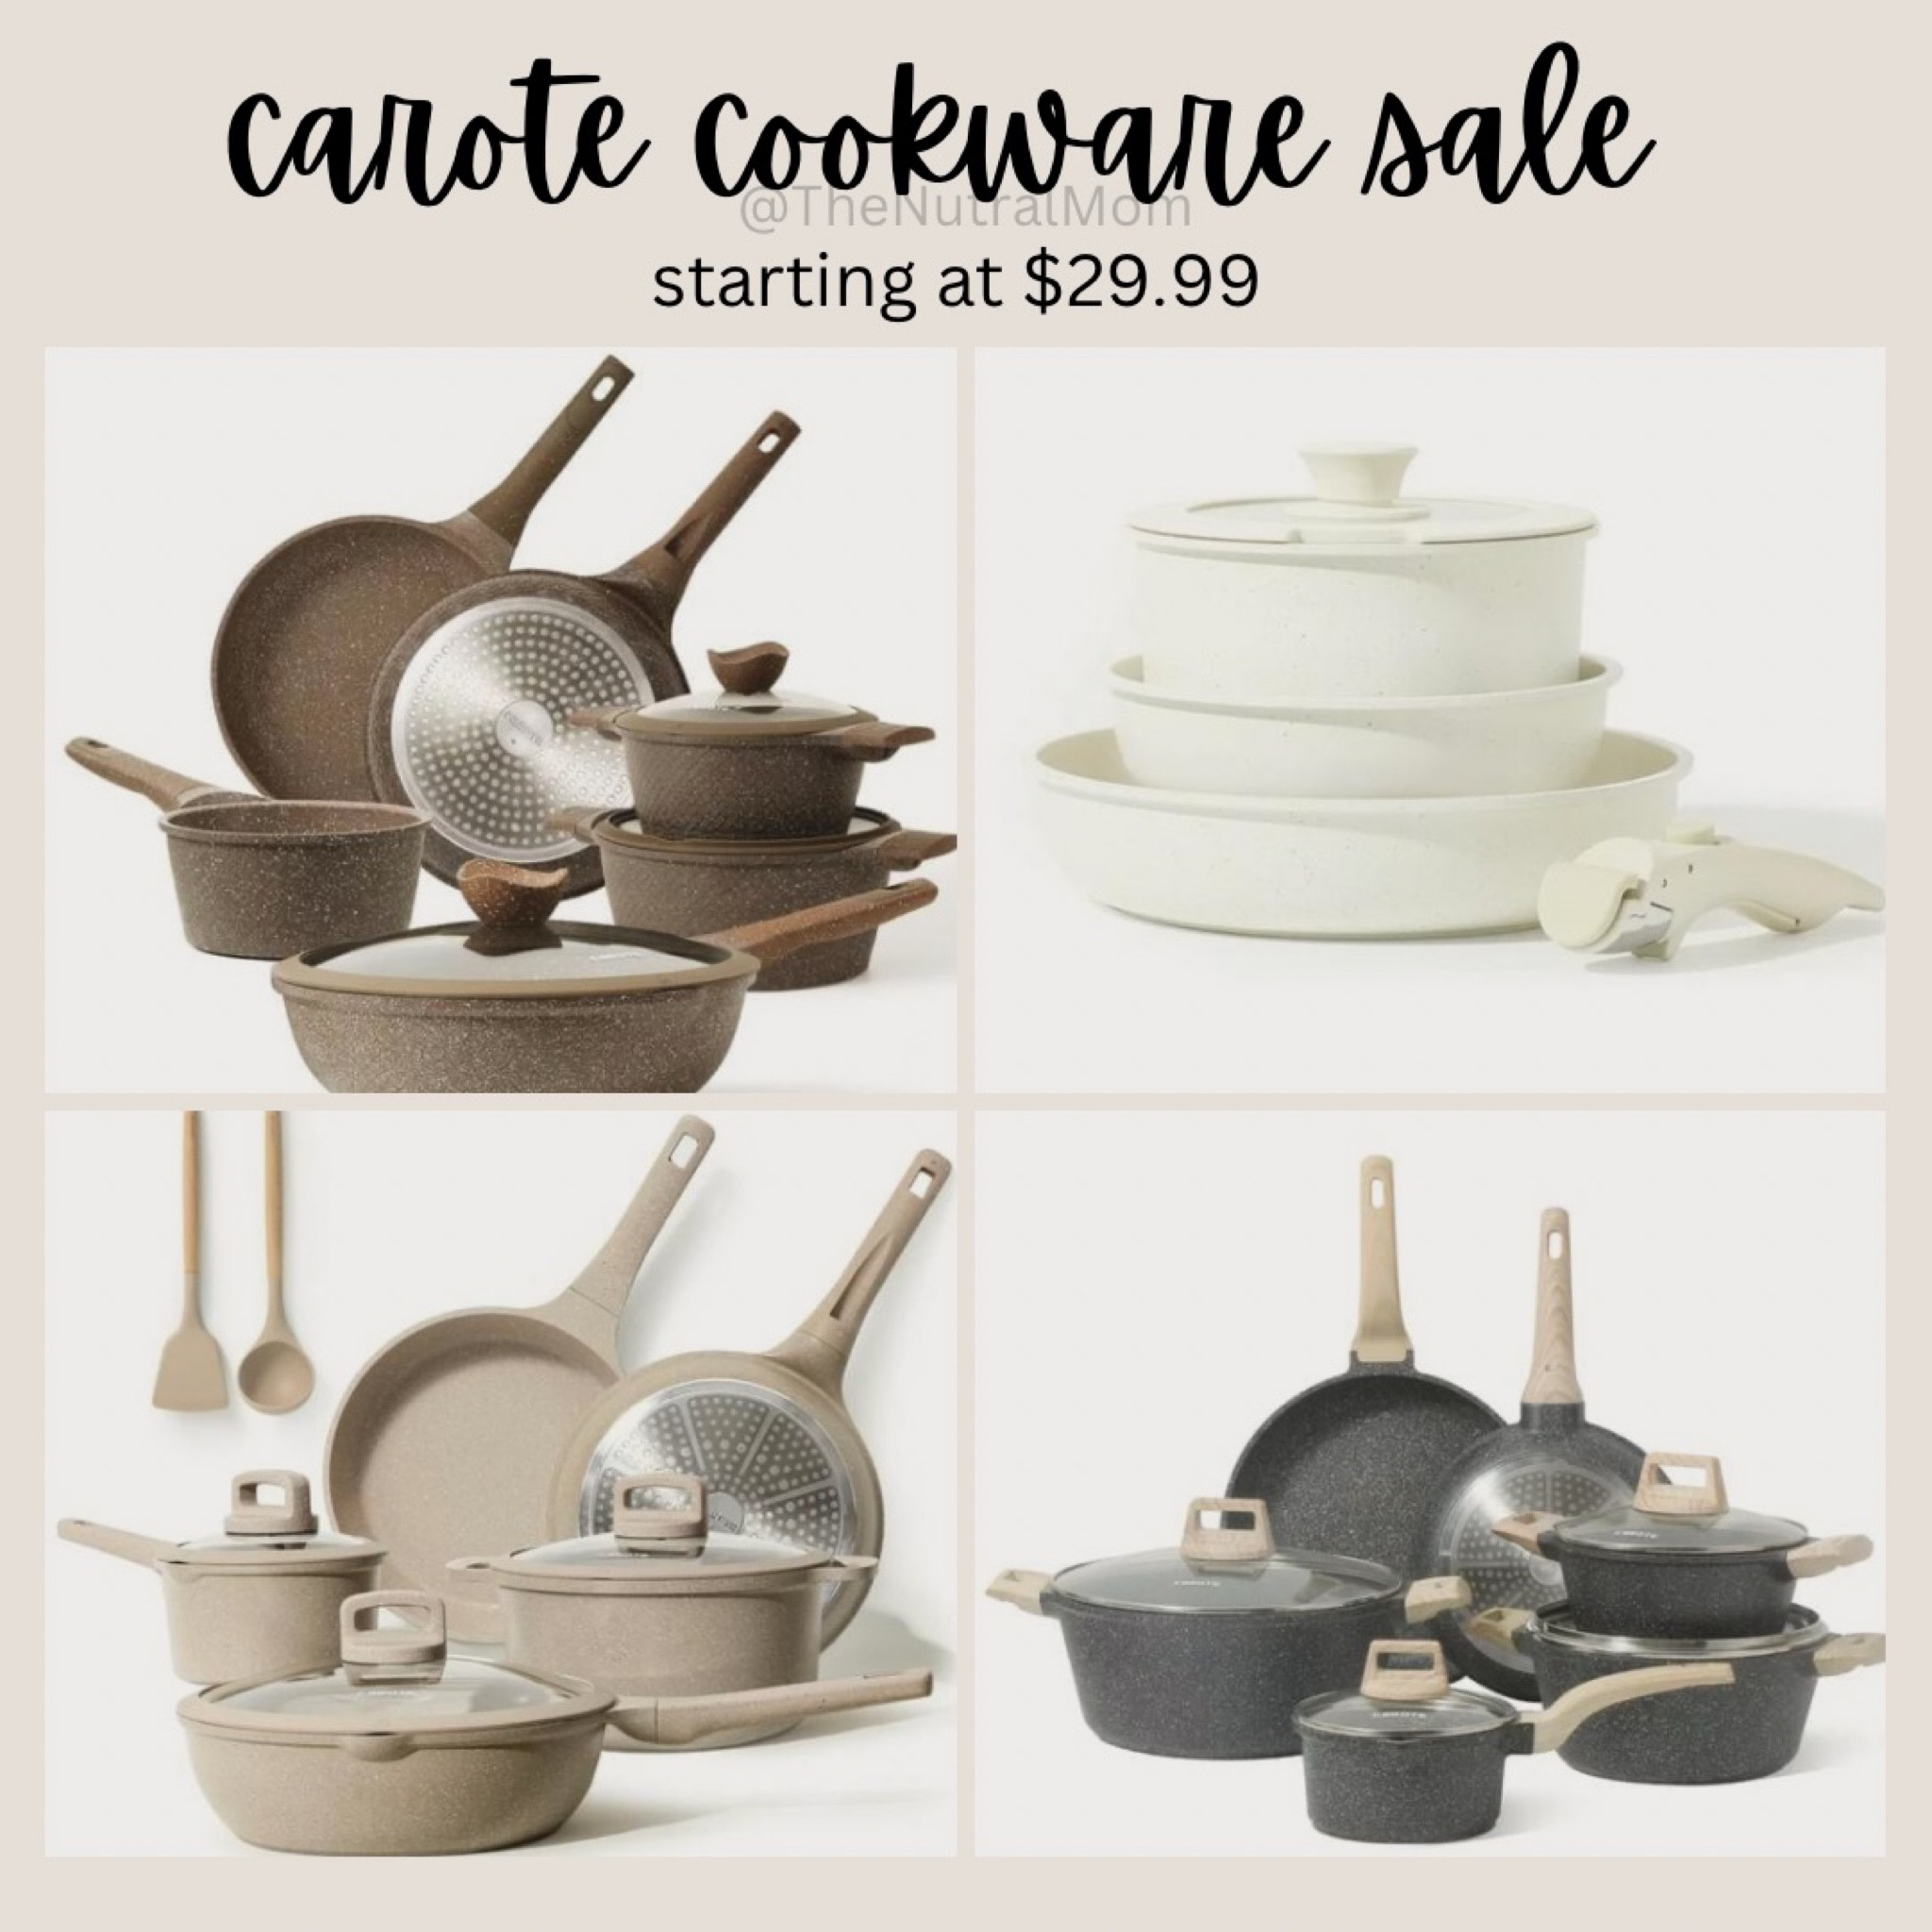 The TikTok-viral Carote pots and pans set is $50 off on  today